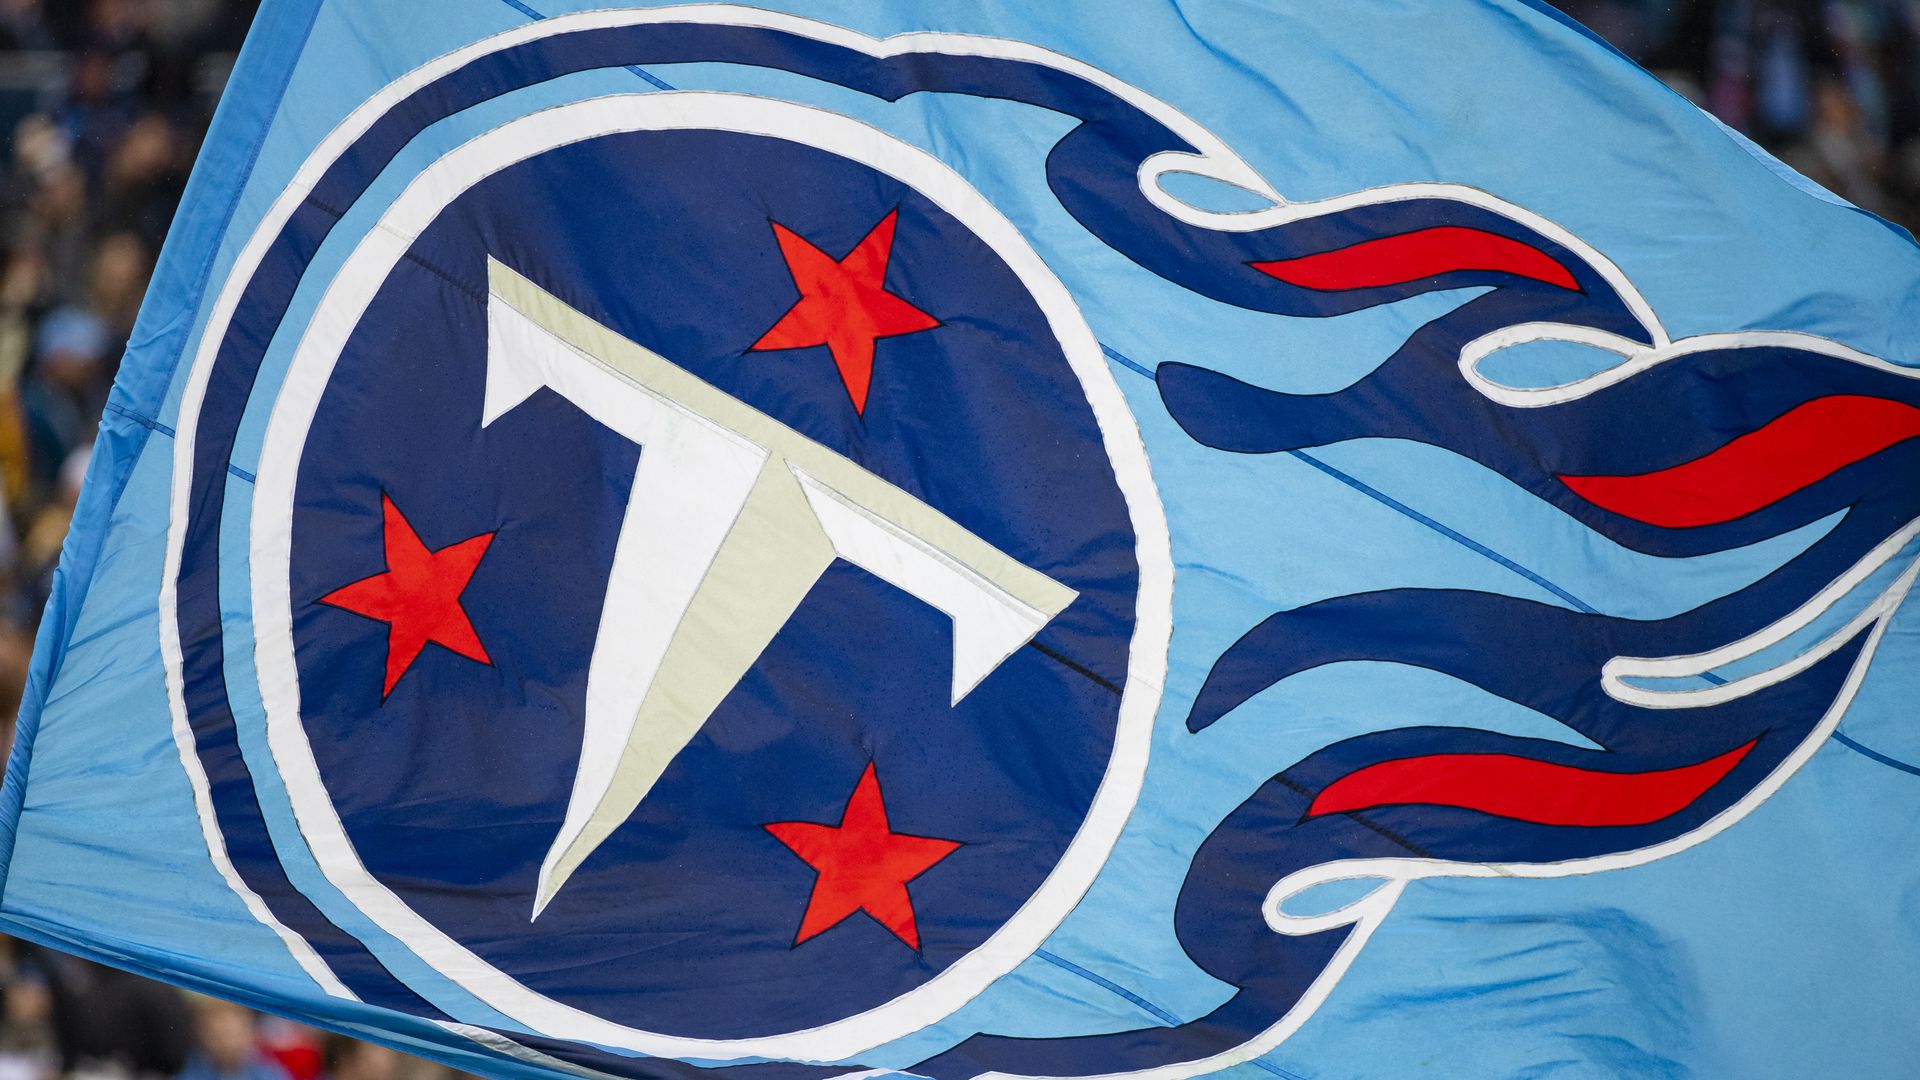 A flag with the Titans logo